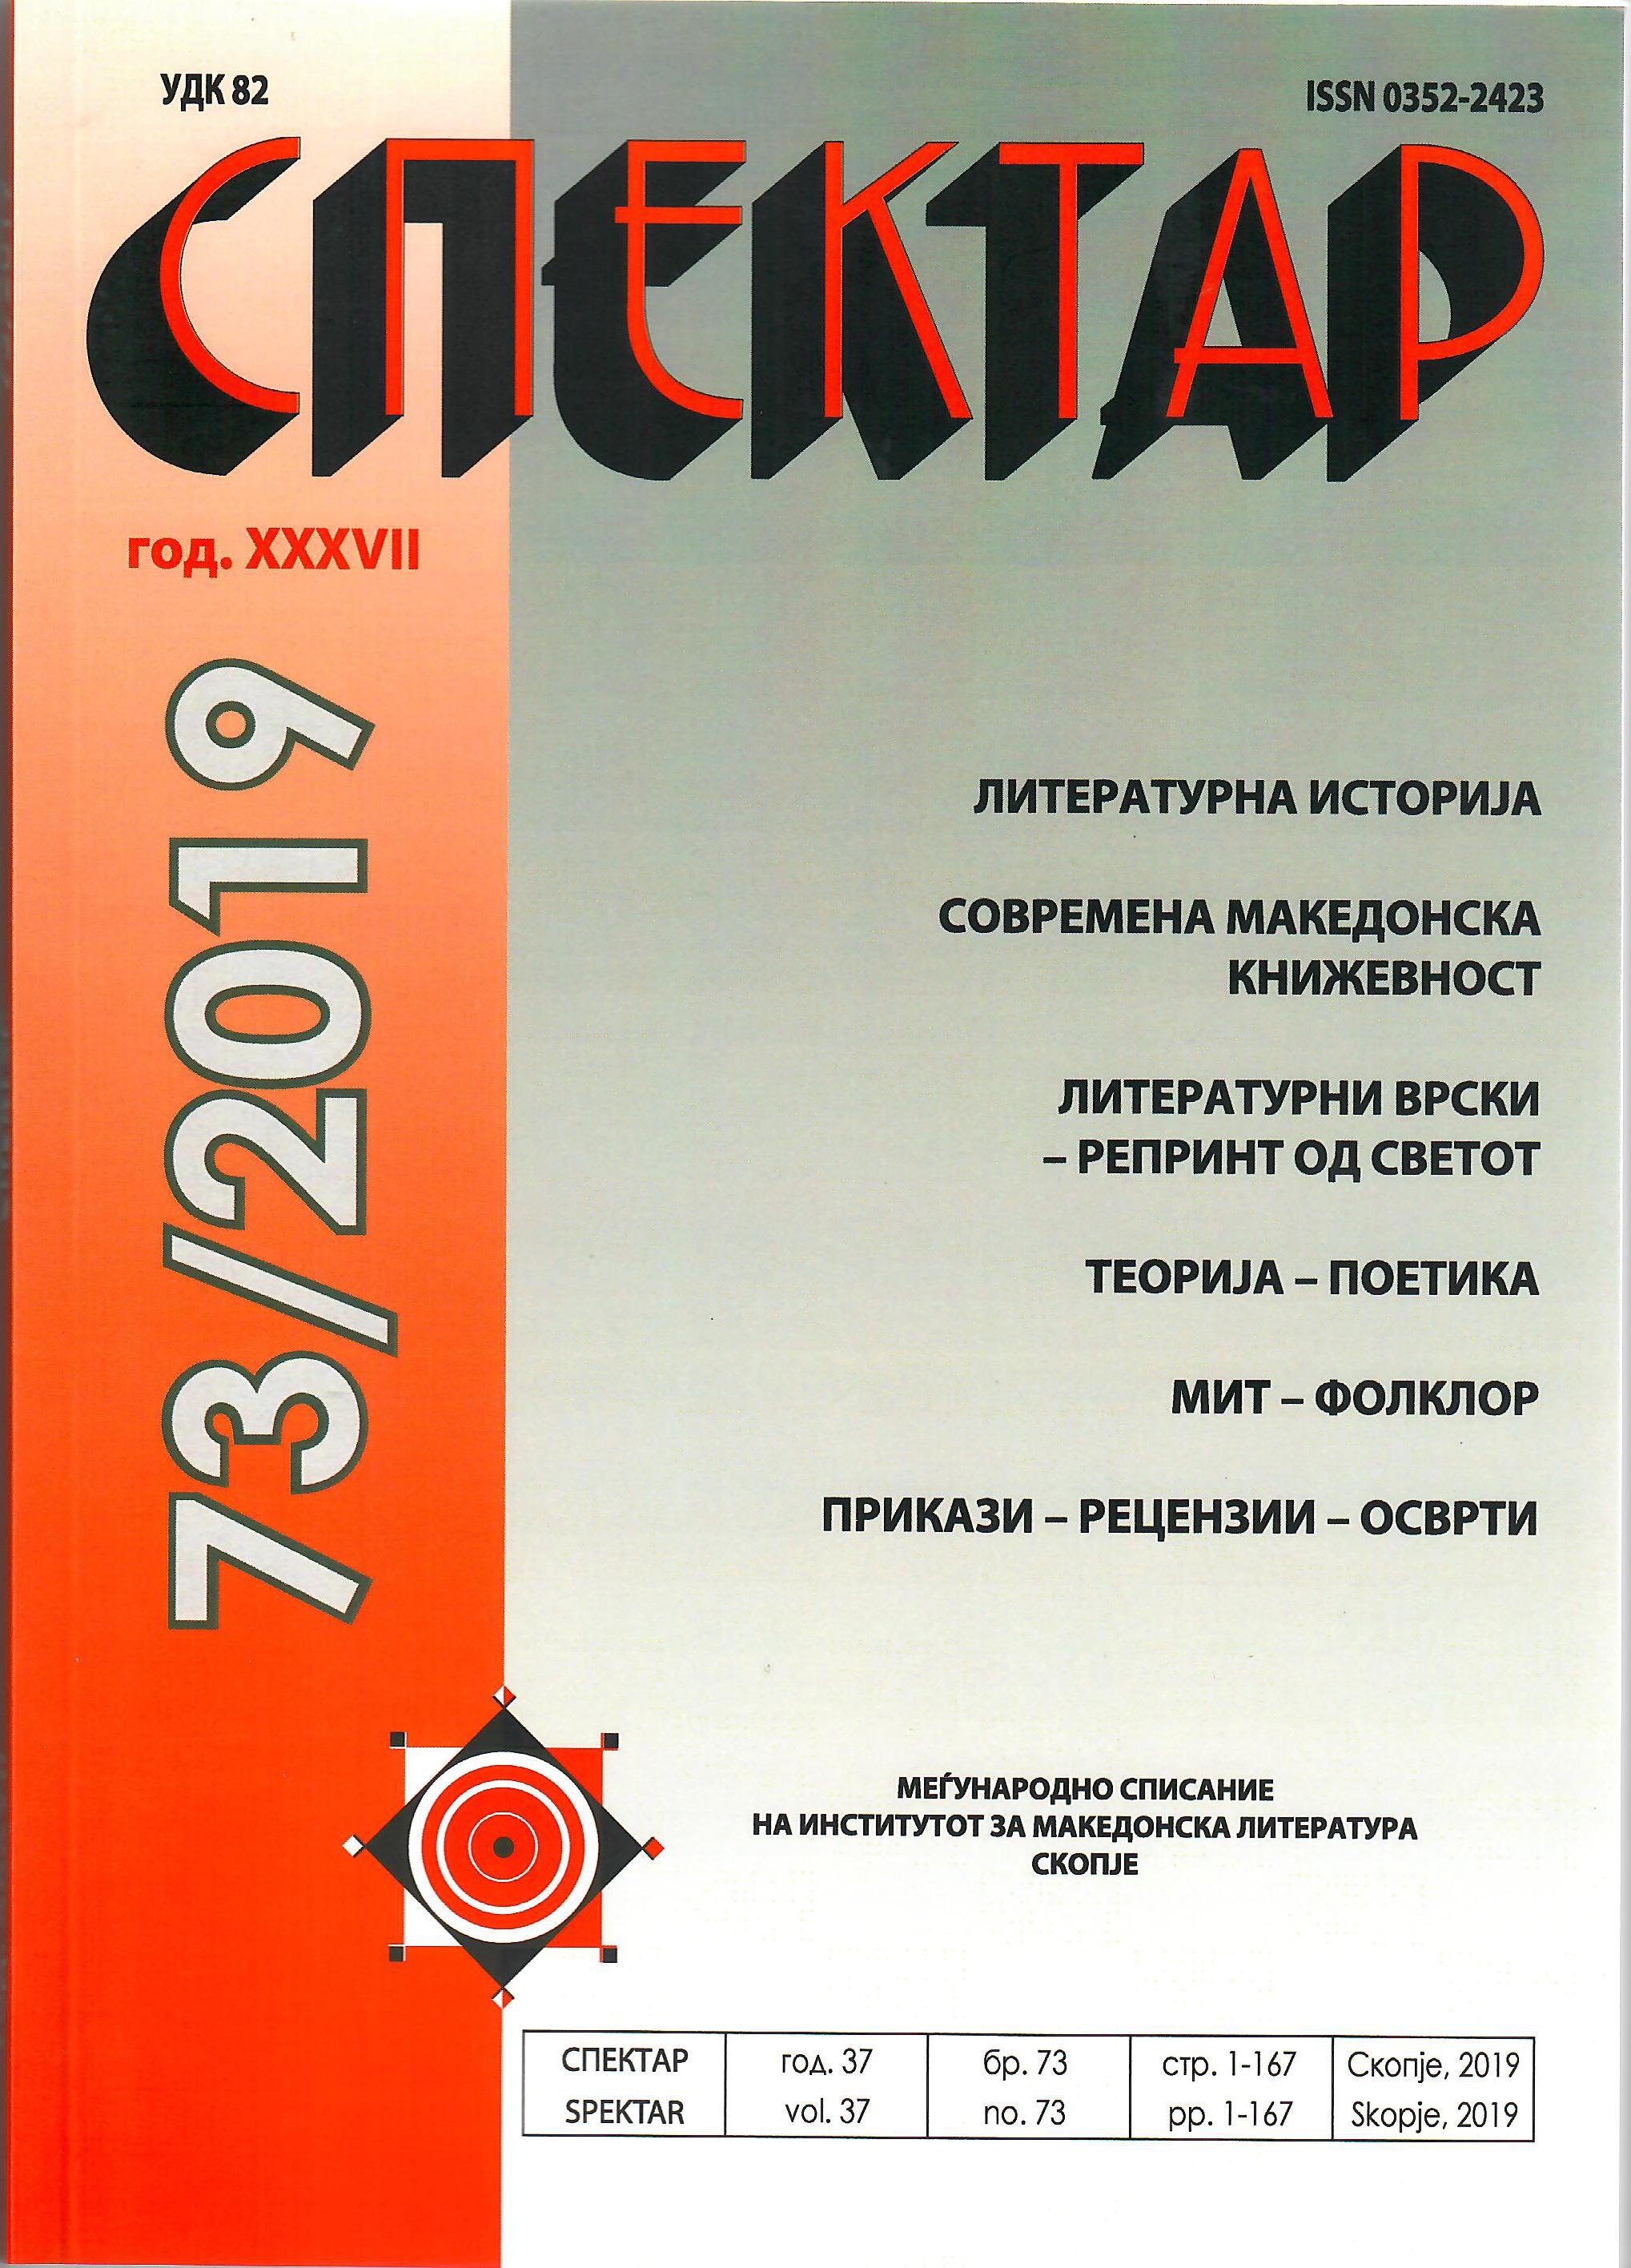 AN EXAMPLE OF RUSSIAN FOLKTALES INSPIRATION IN MACEDONIAN LITERATURE Cover Image